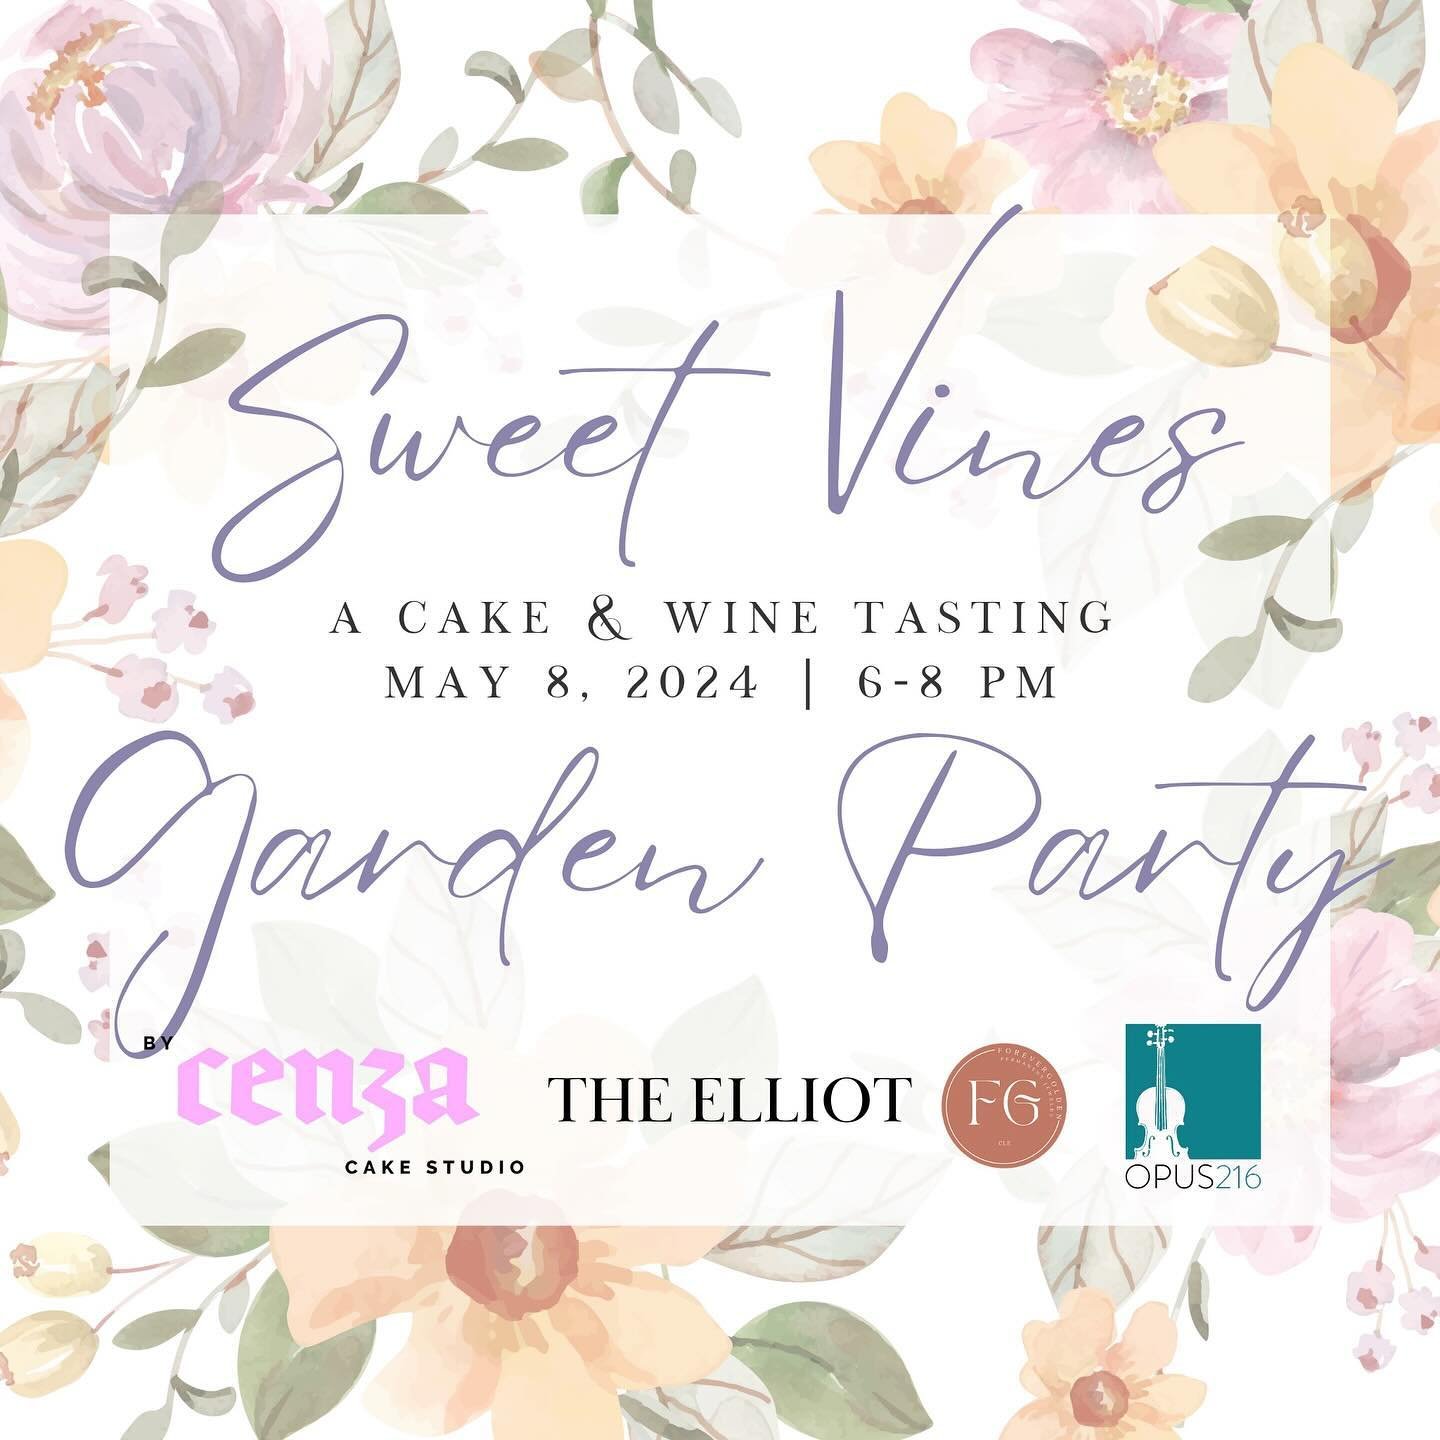 Still searching for the perfect cake for your wedding or the best gift for Mother&rsquo;s Day?

Join us on May 8th from 6-8 PM for an evening garden party featuring a wine &amp; cake tasting with specialty cakes by By Cenza Cake Studio.

Your ticket 